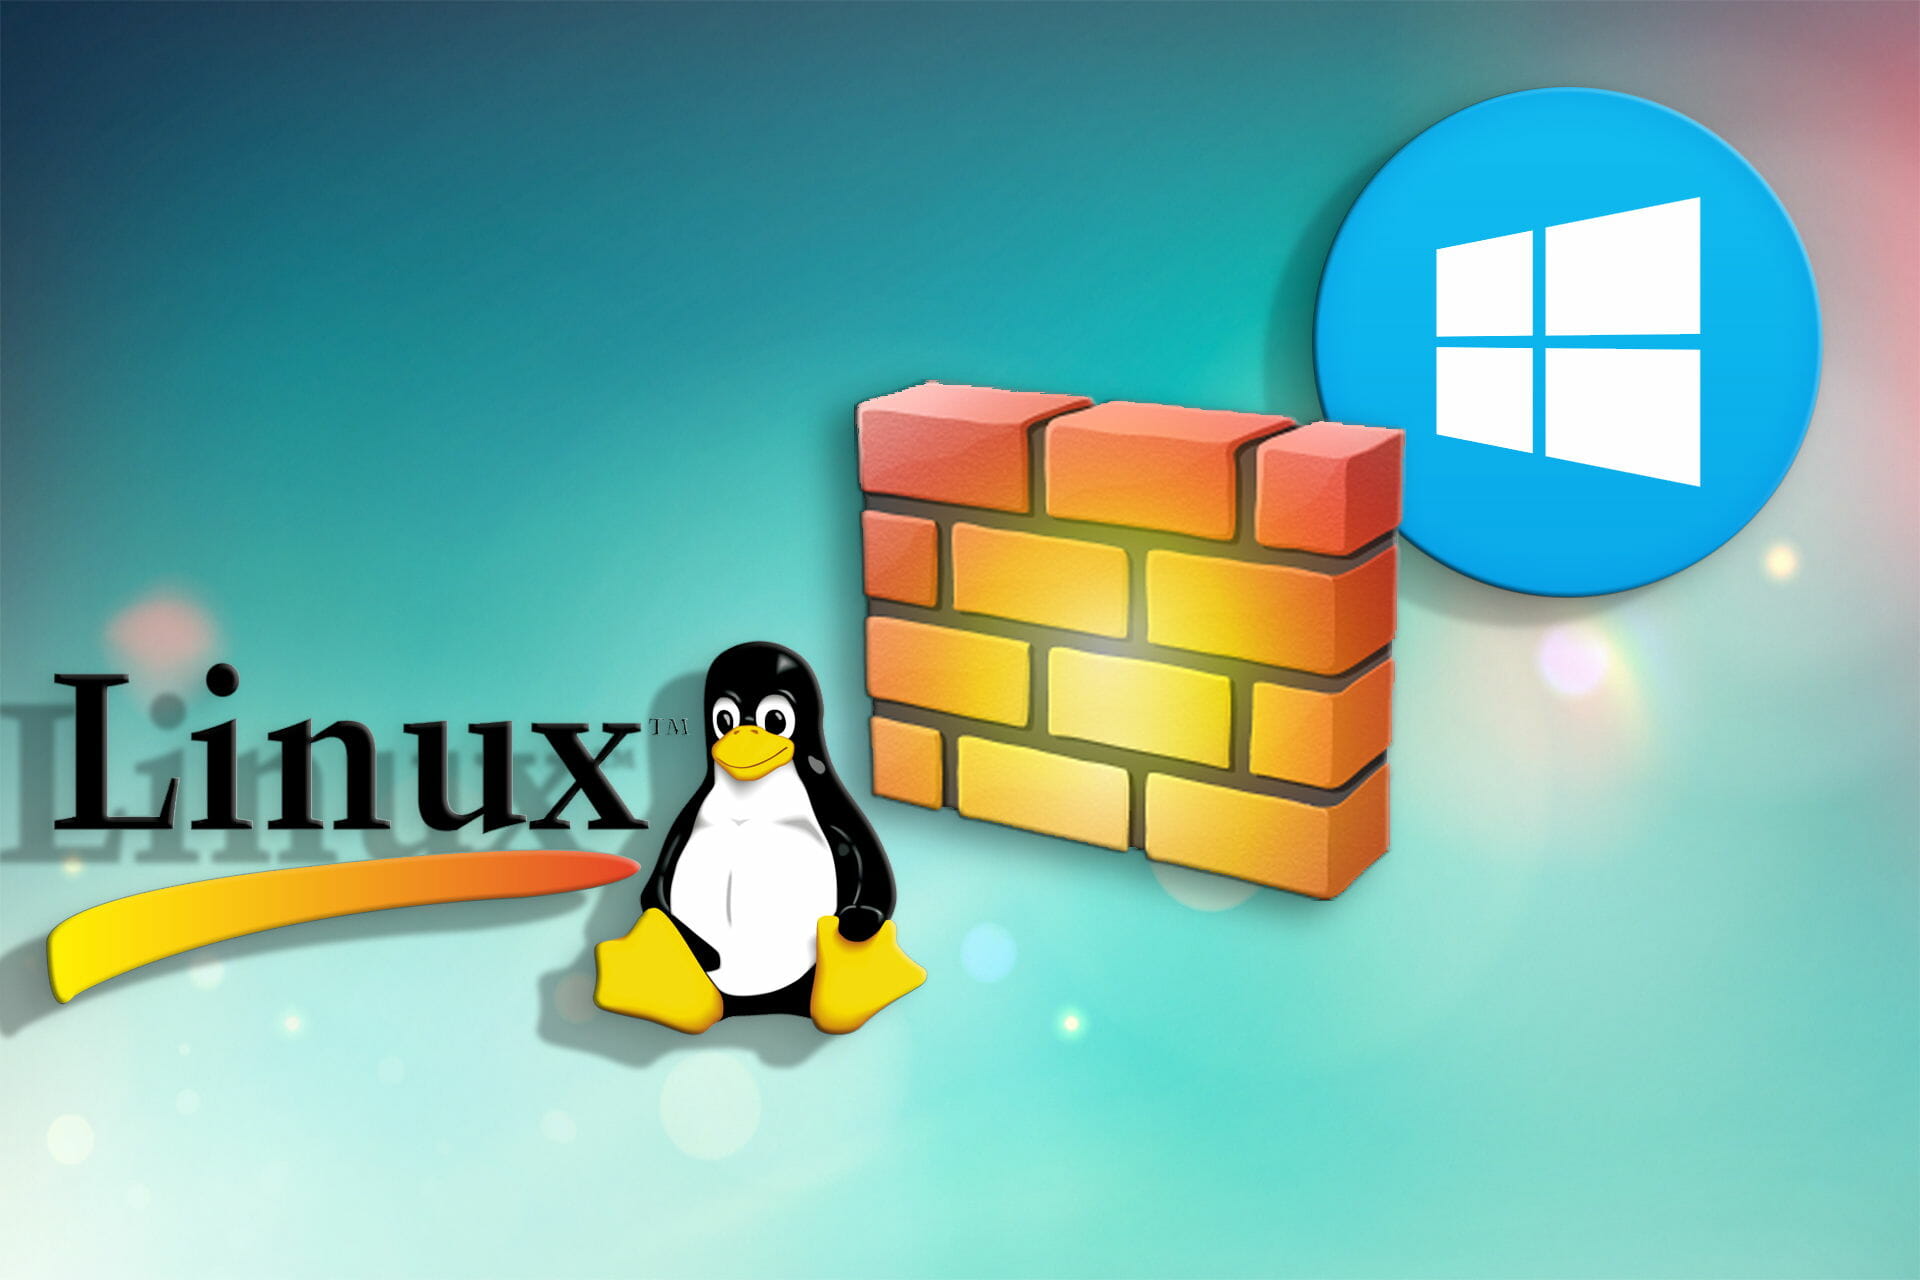 Running WS for Linux 2 may lead to leaking Internet traffic